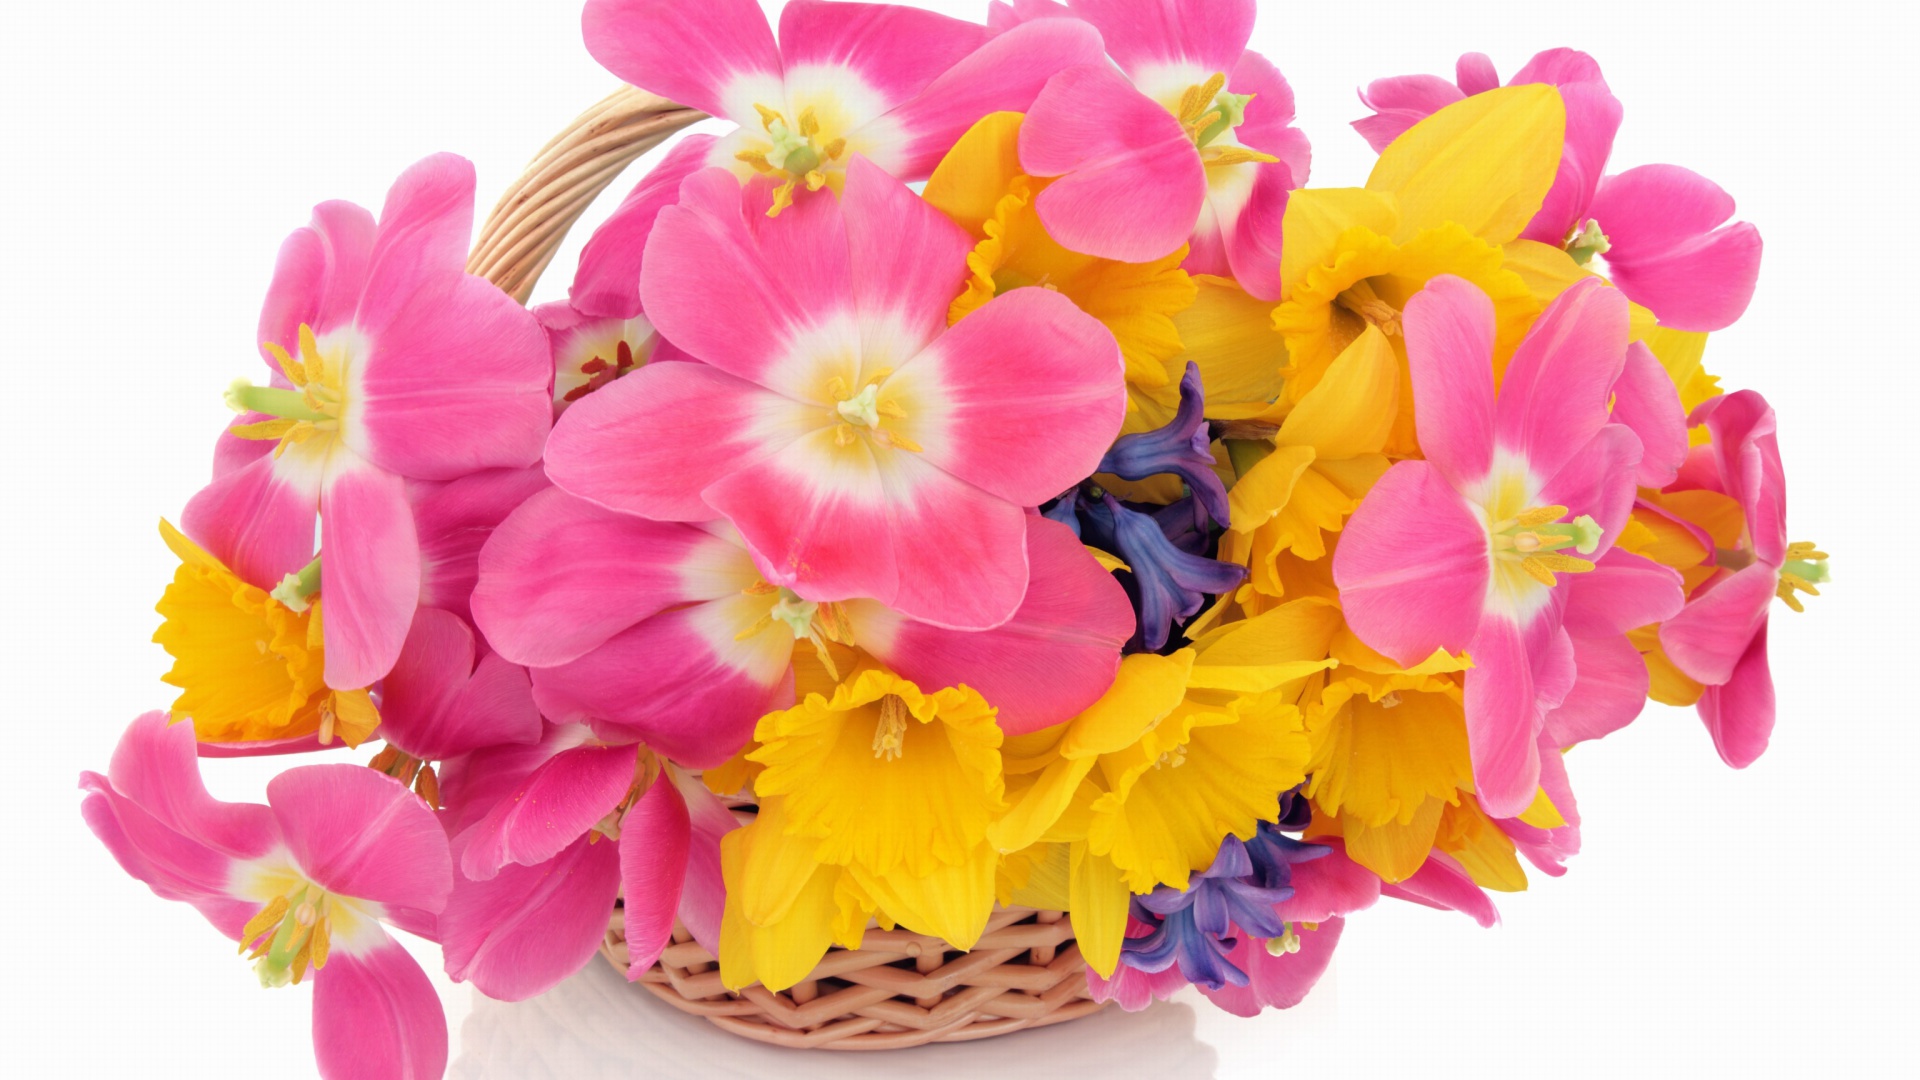 Indoor Basket of Tulips and Daffodils wallpaper 1920x1080